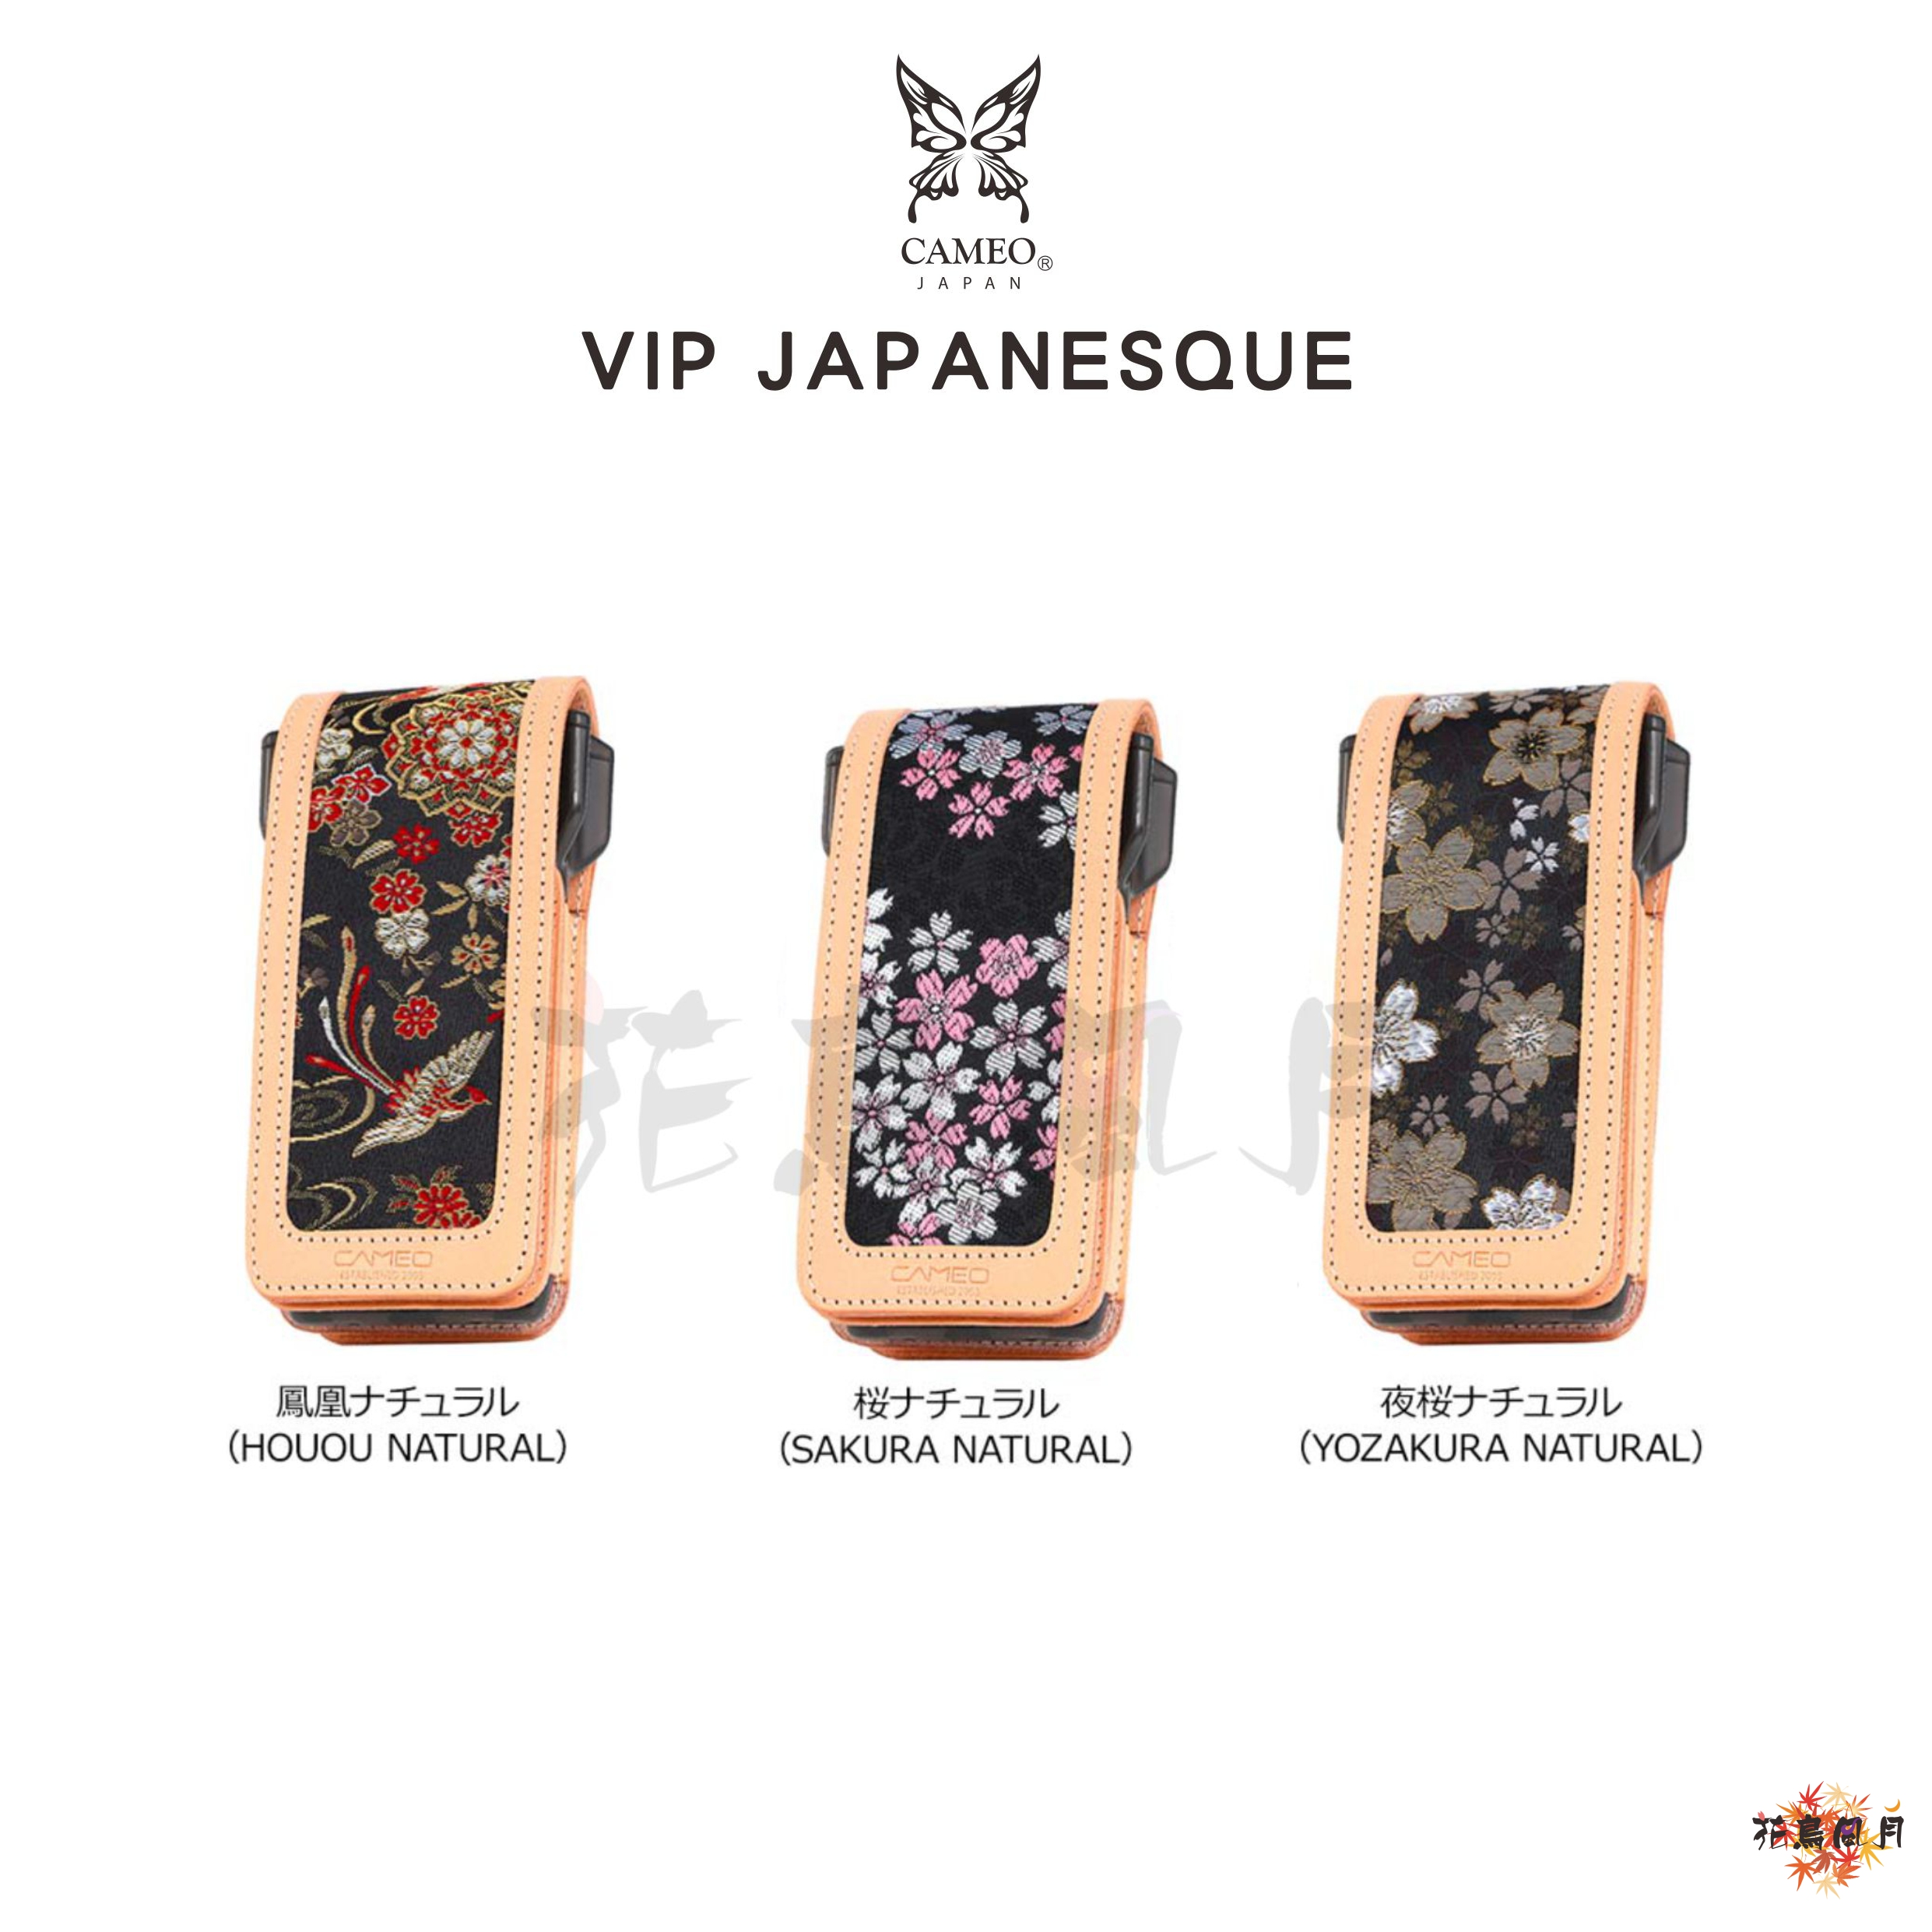 CAMEO-VIPJAPANESQUE